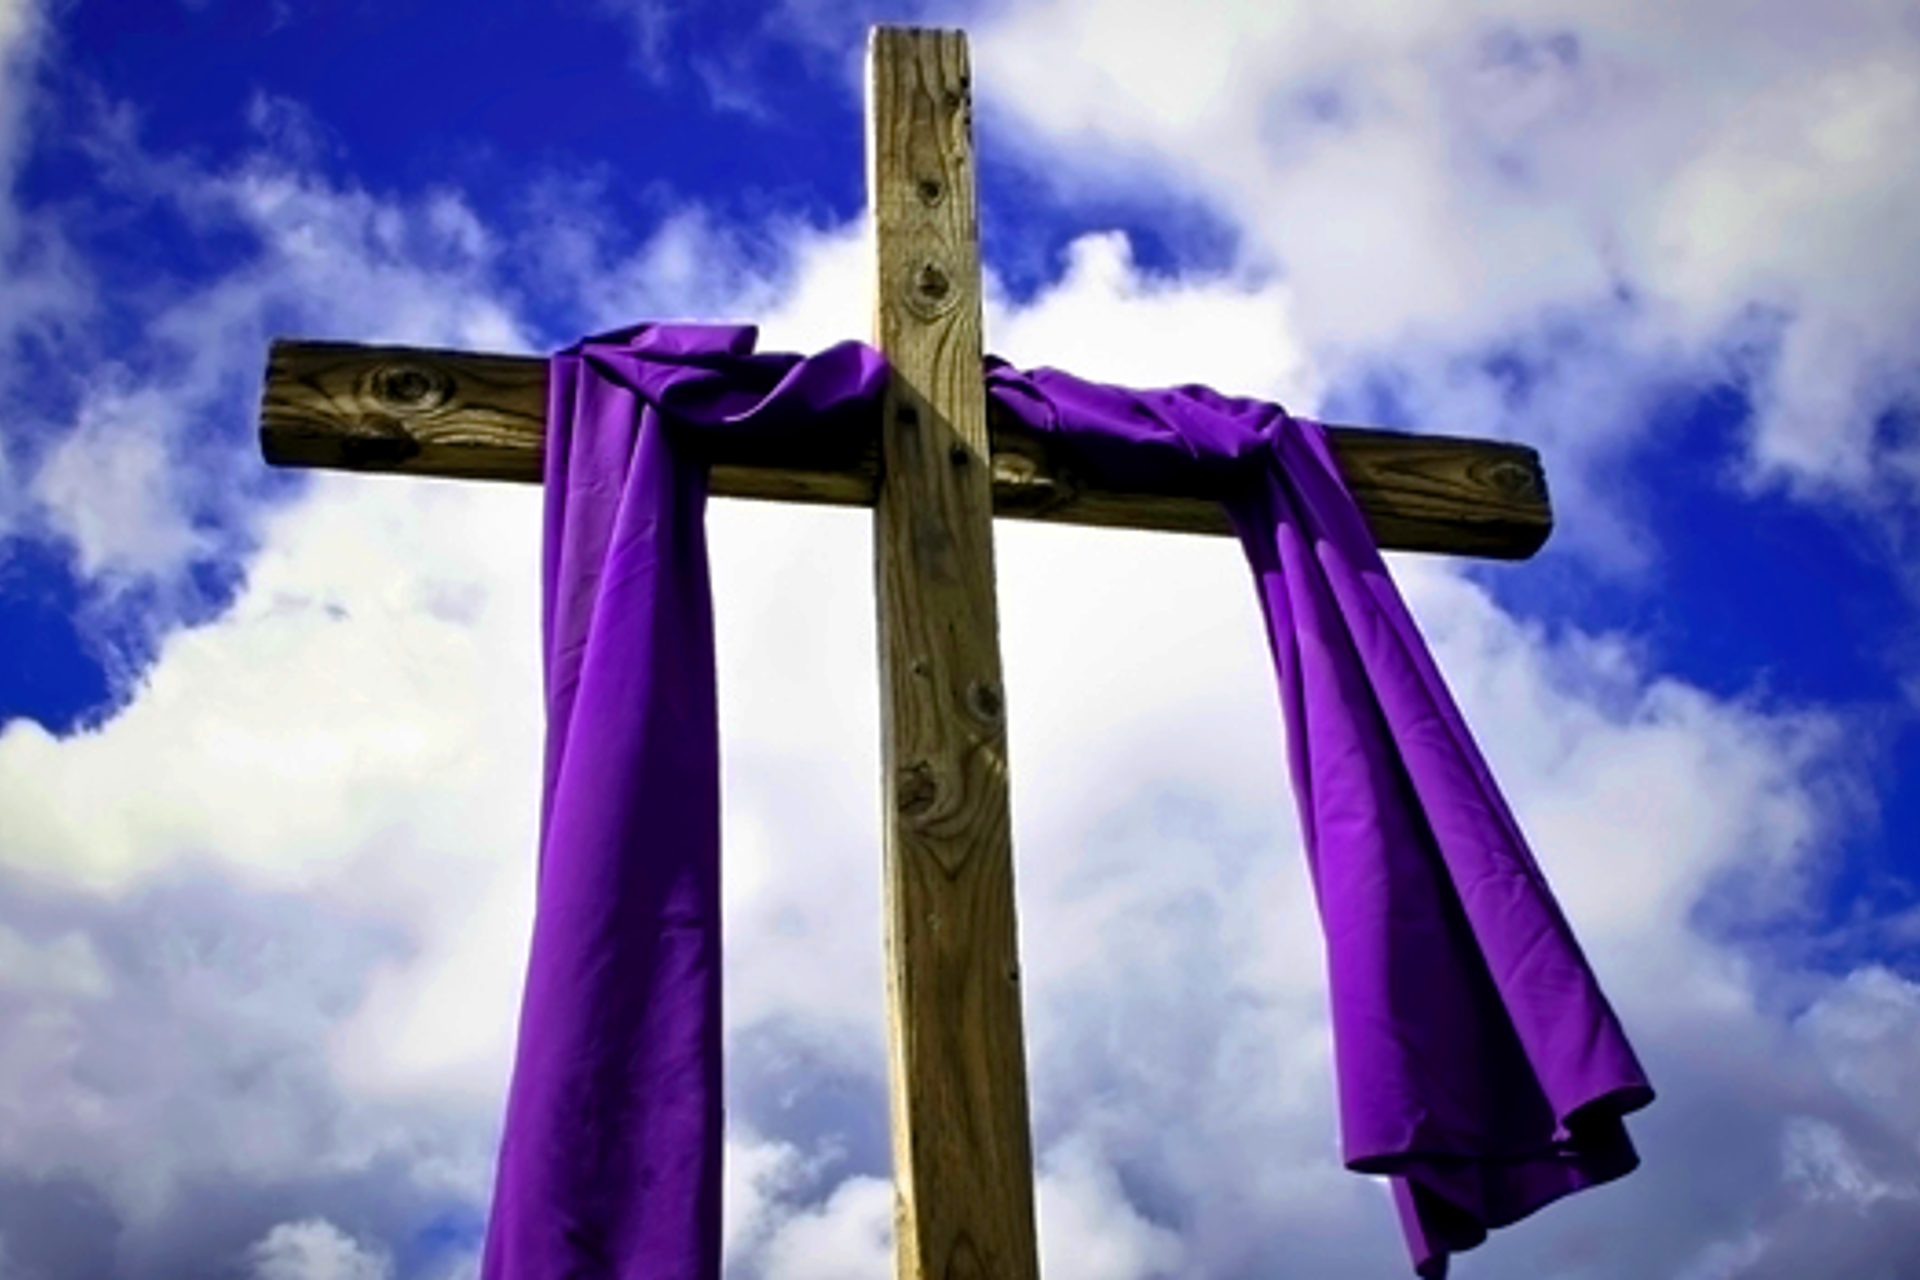 Statement to Mark the Beginning of Lent.